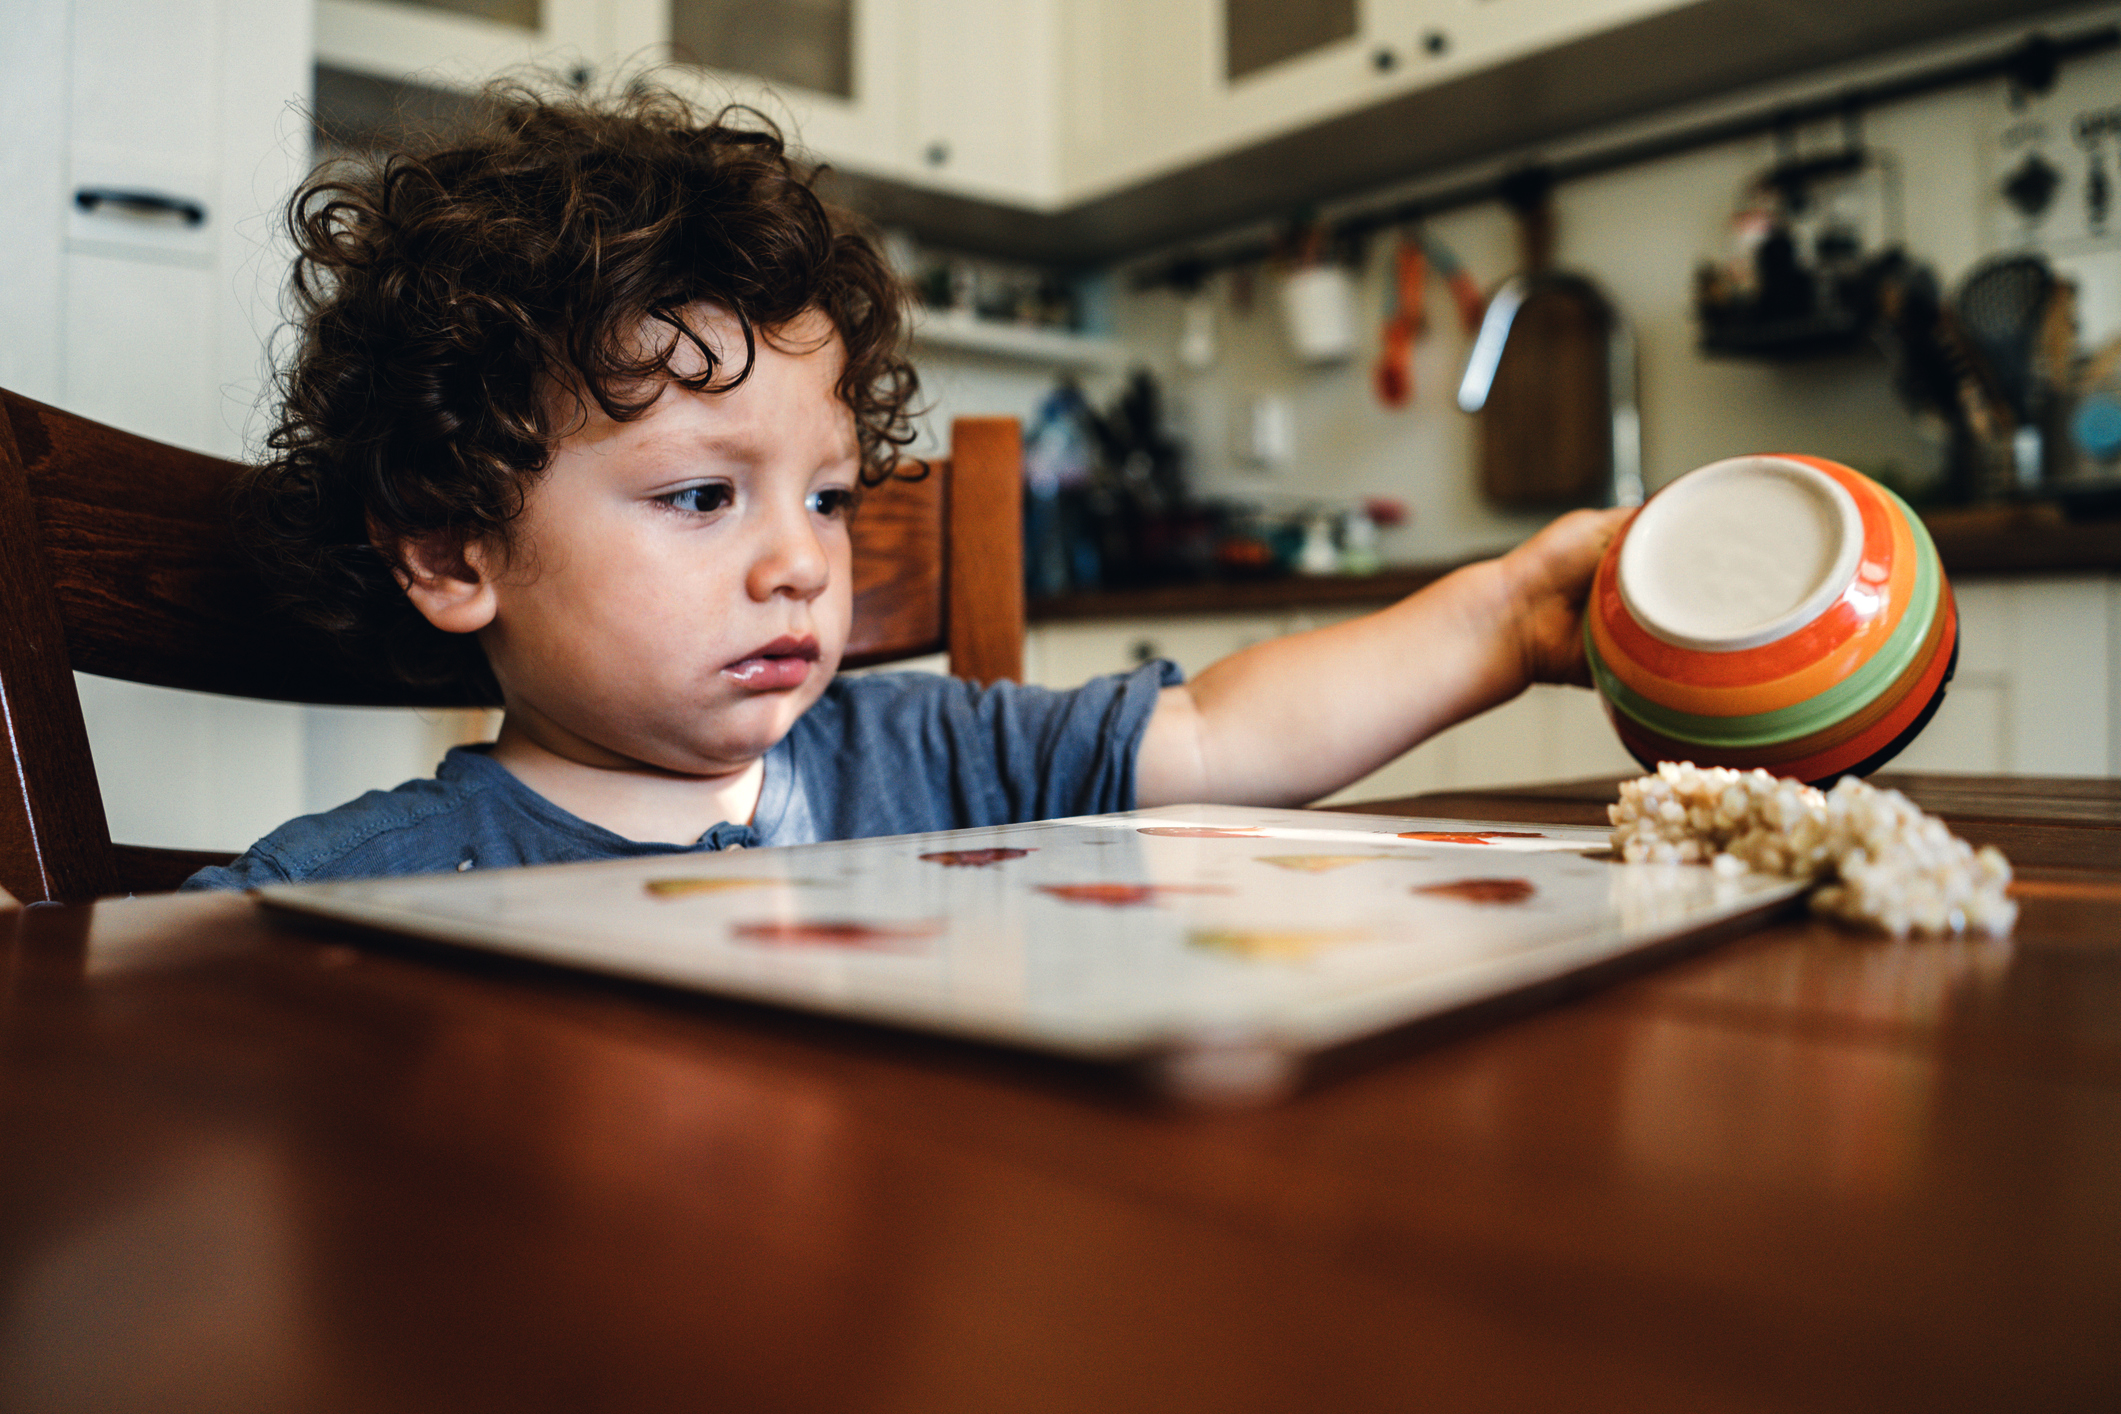 Why Is My Child Suddenly Not Eating?